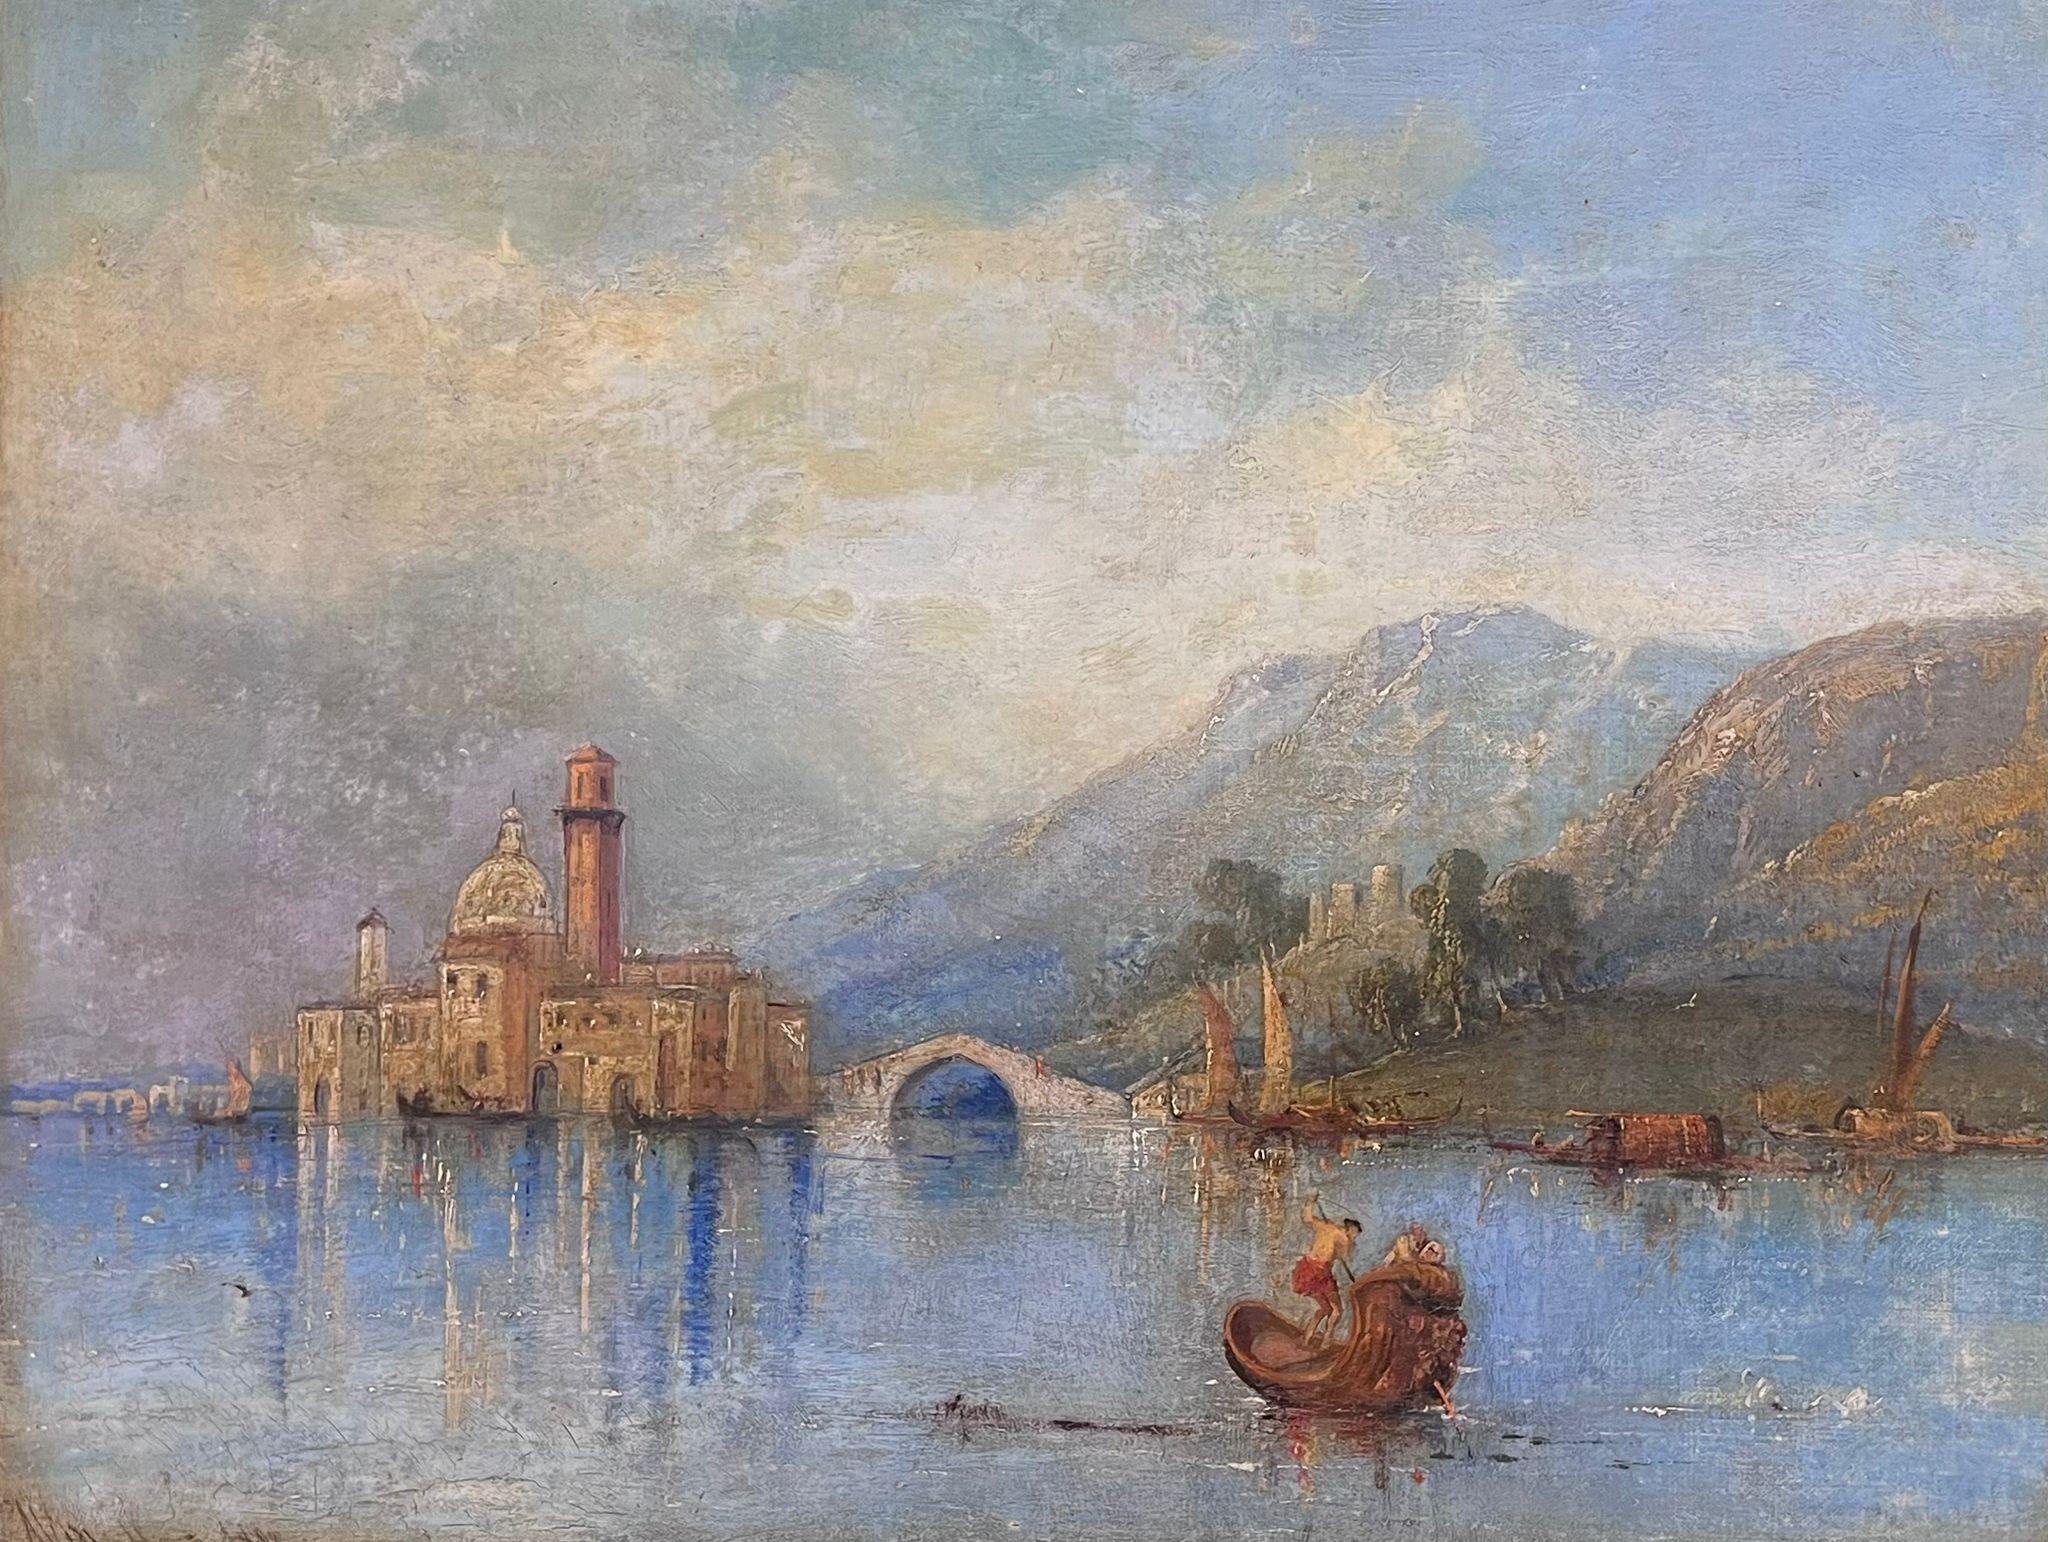 Continental Lake Scene with Ancient City Buildings
Attributed to William James Muller (British, 1812-1845)
signed oil on canvas, framed
framed: 24 x 29 inches
canvas: 18.5 x 23 inches
provenance: private collection, England
condition: very good and